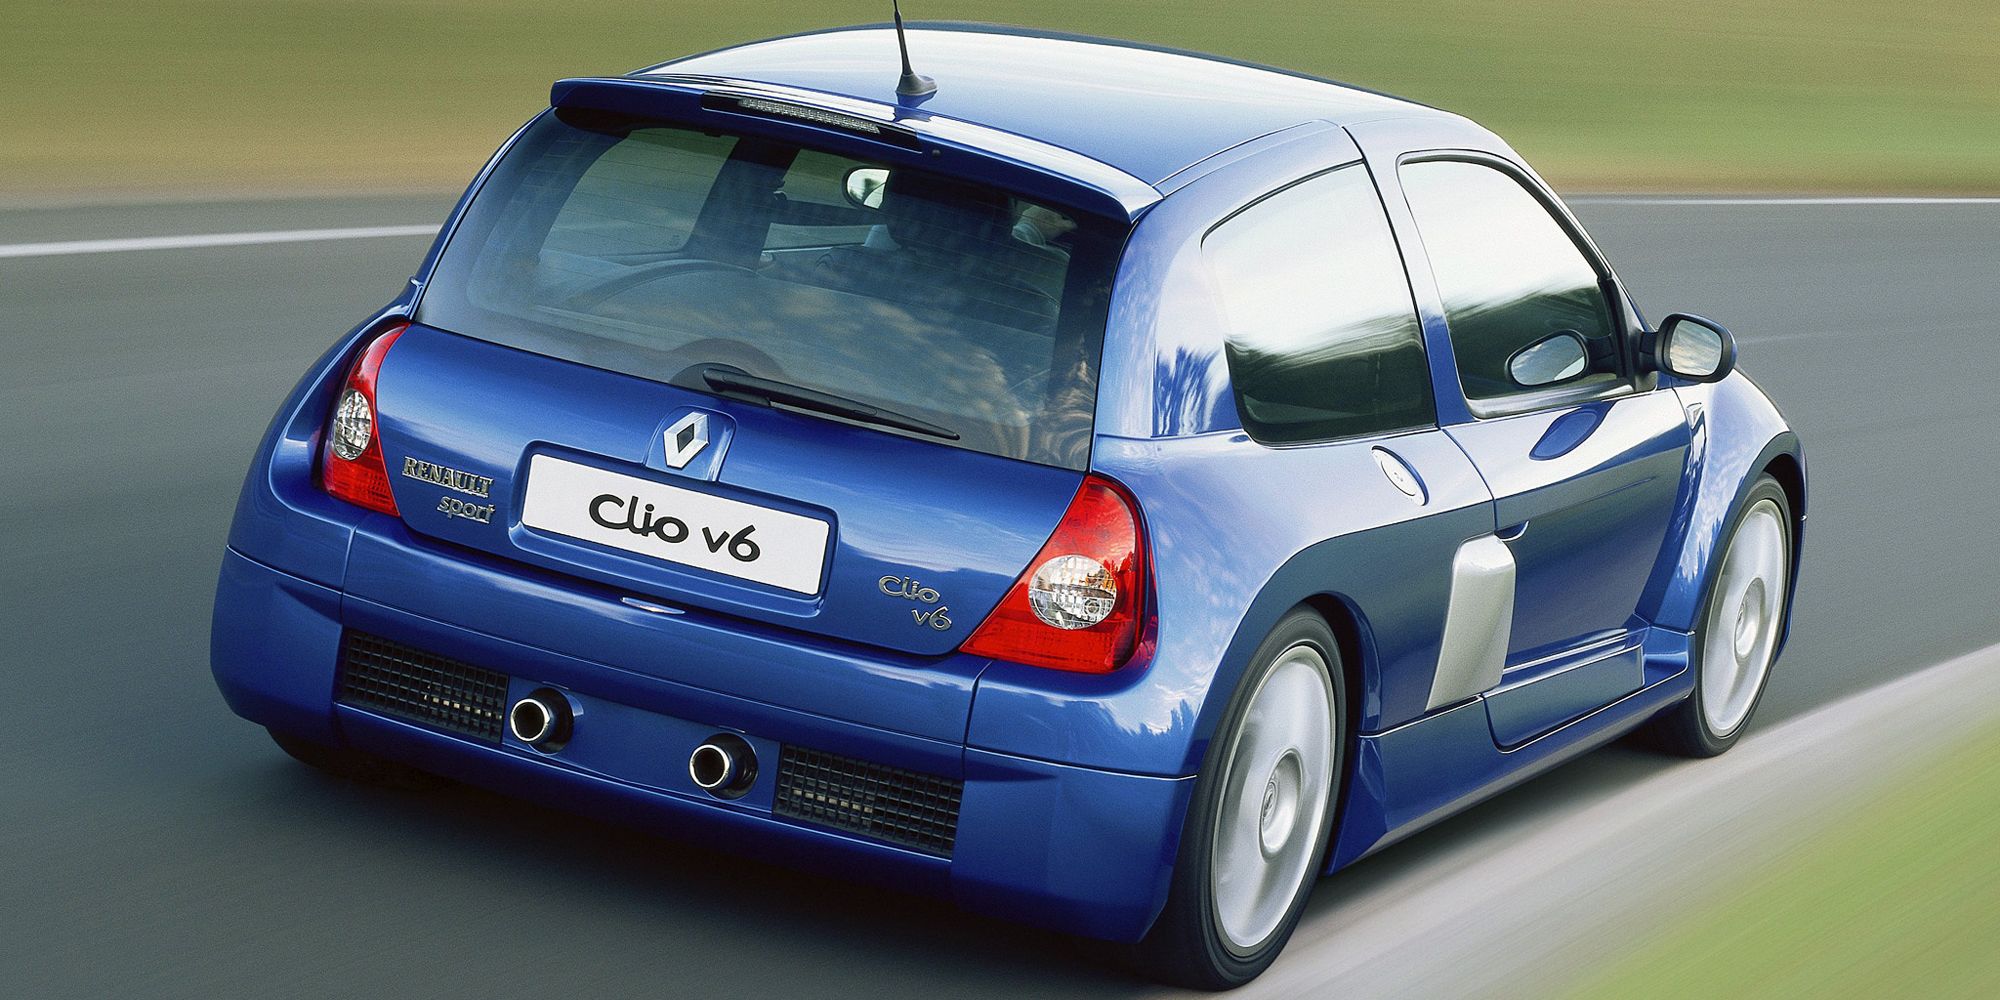 The rear of the Clio Sport V6 on the move